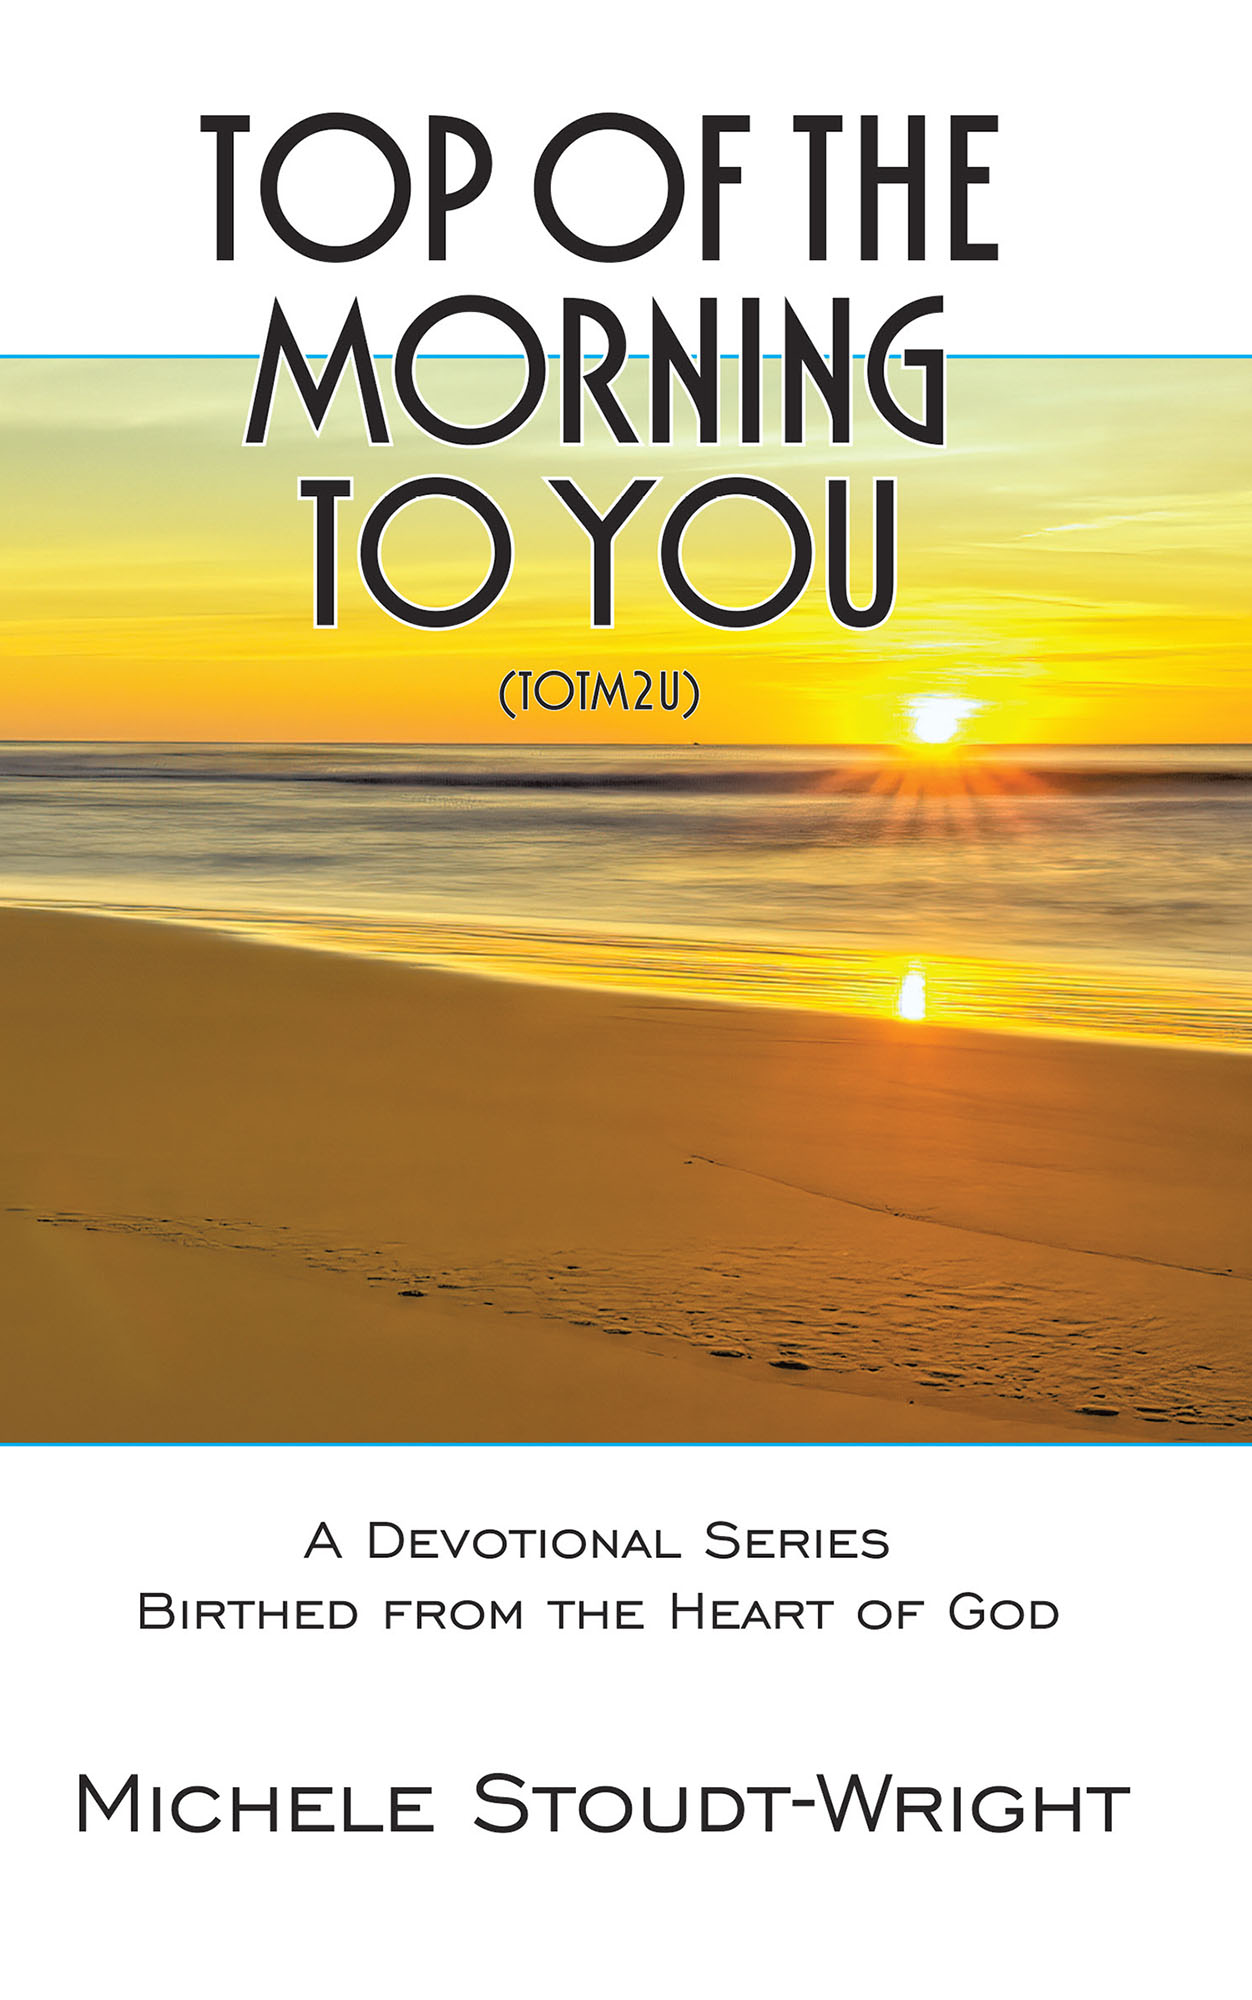 Stoudt-wright's New Book 'Top Of Morning To You' Is A Brilliant Devotional Series That Carries Encouragement And Hope Newswire